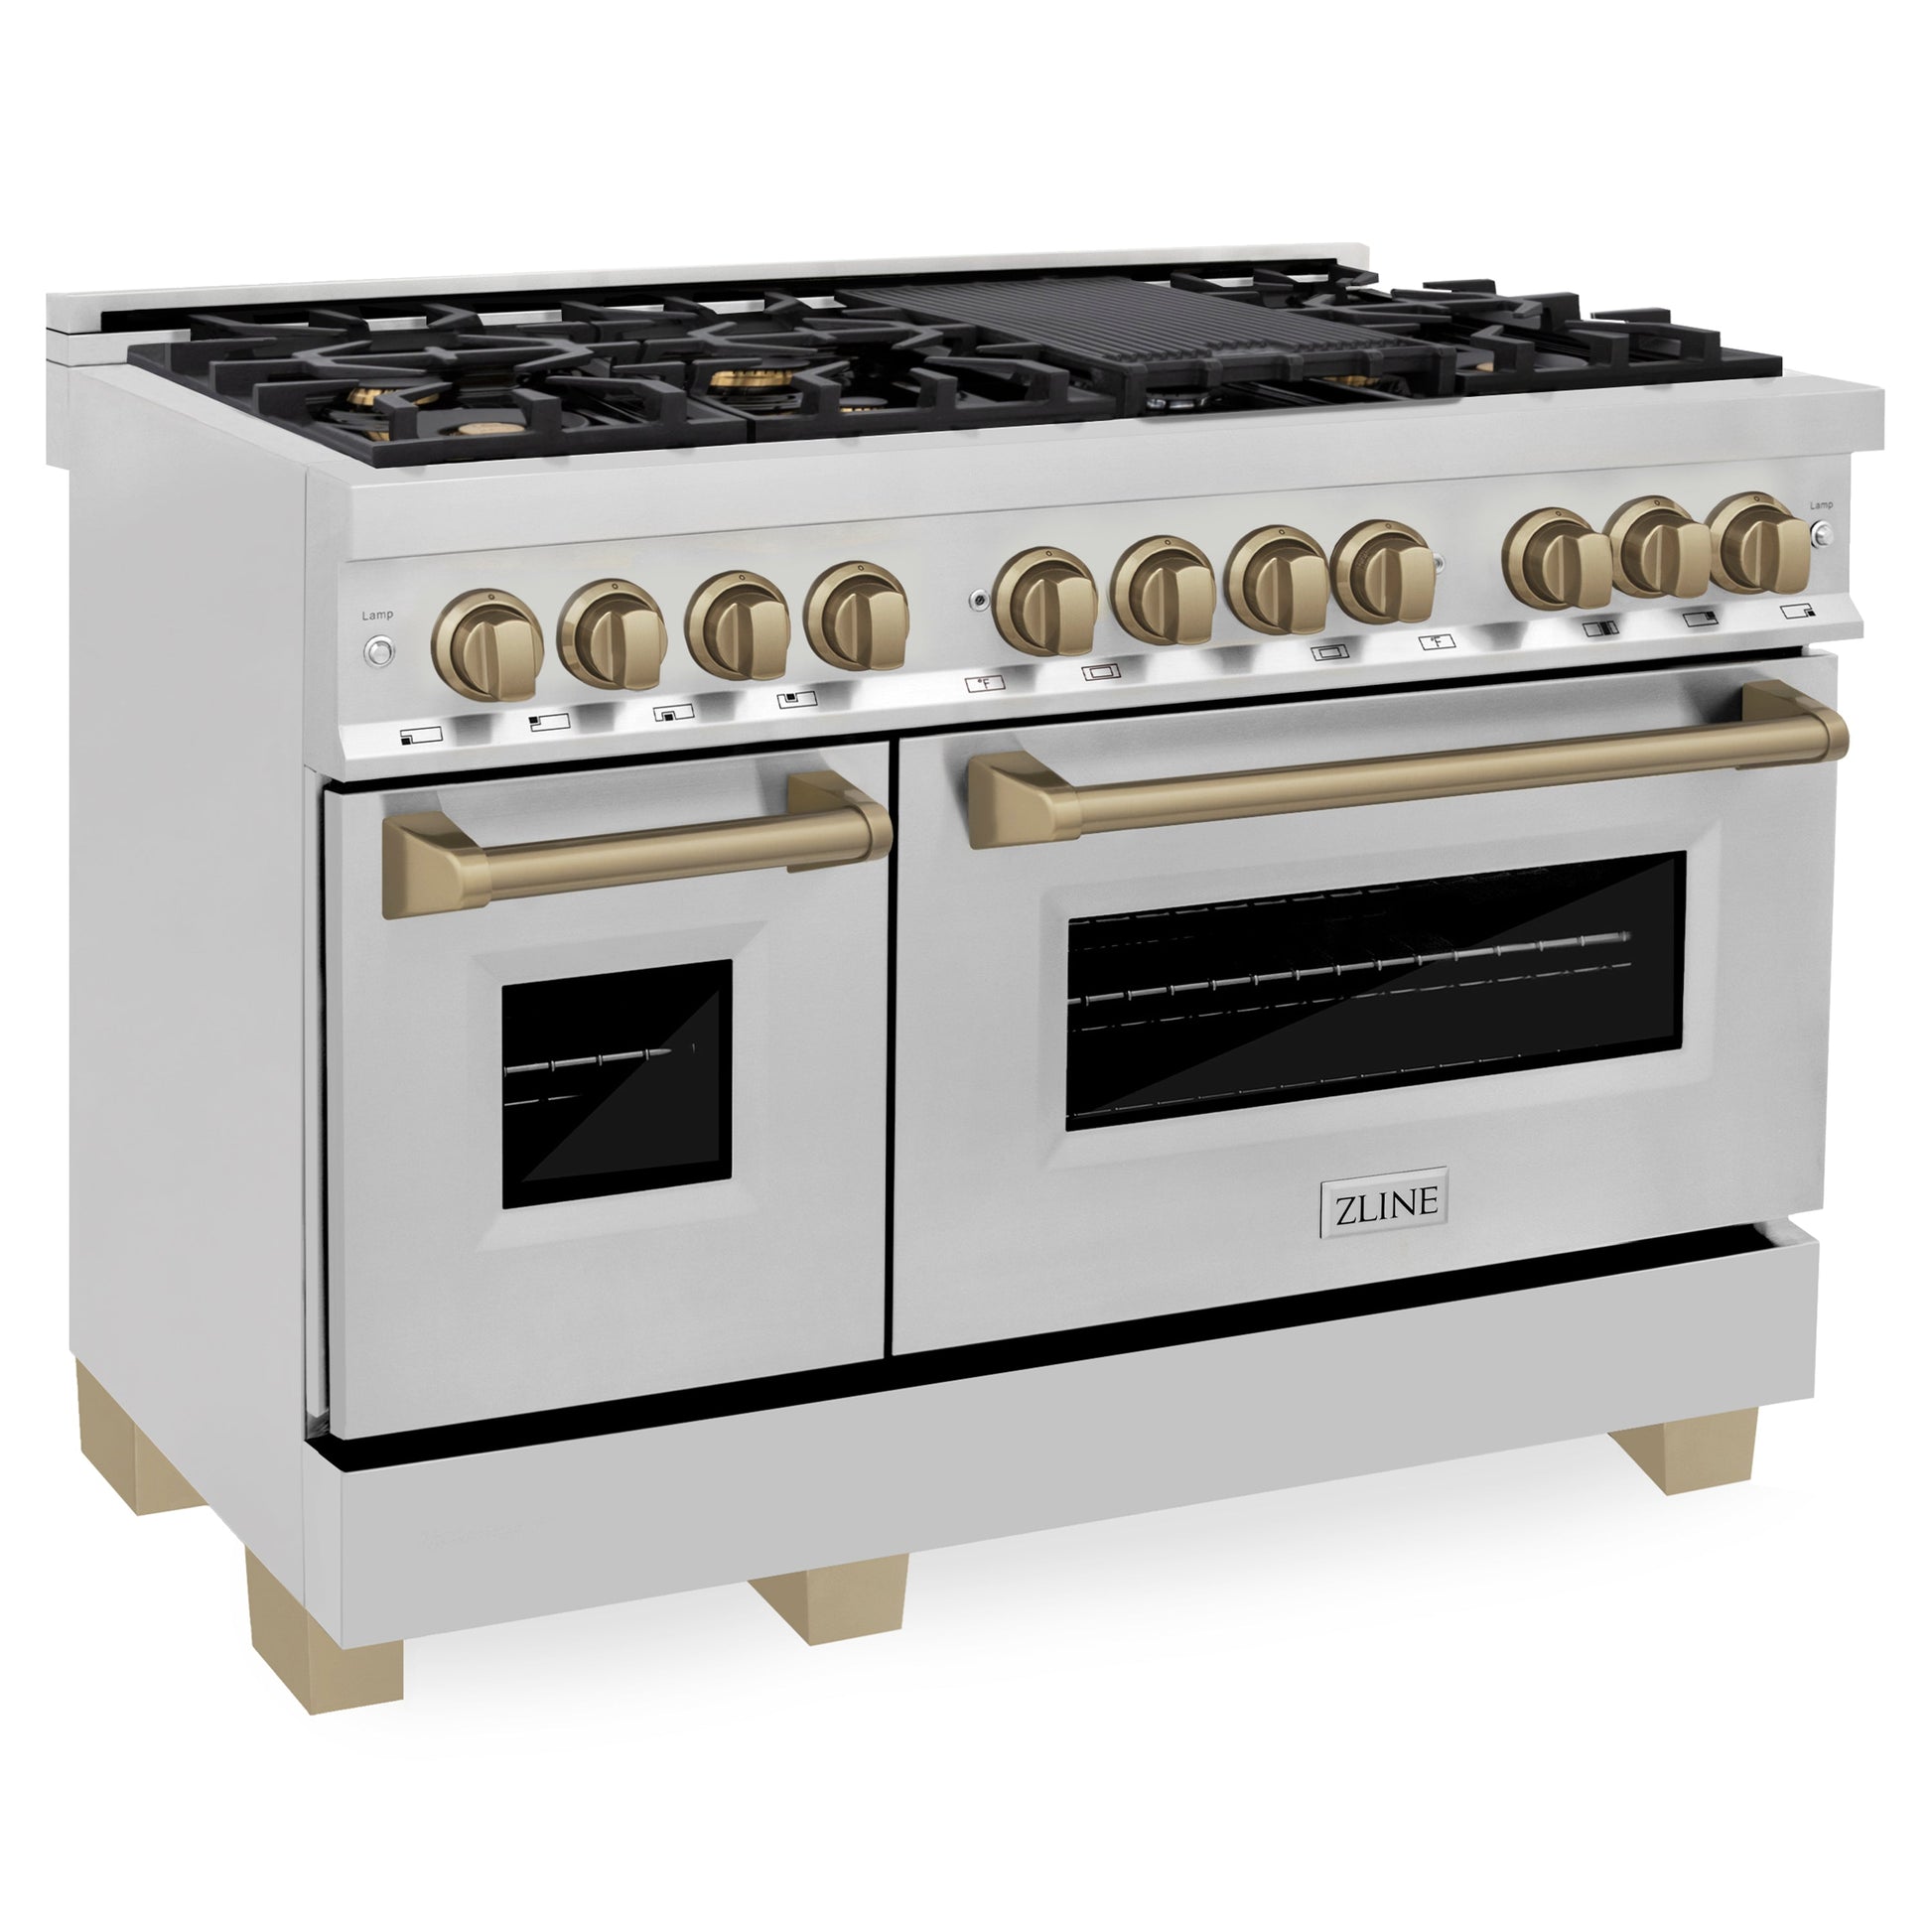 ZLINE 3-Appliance 48" Autograph Edition Kitchen Package with Stainless Steel Dual Fuel Range, Range Hood, and Dishwasher with Champagne Bronze Accents